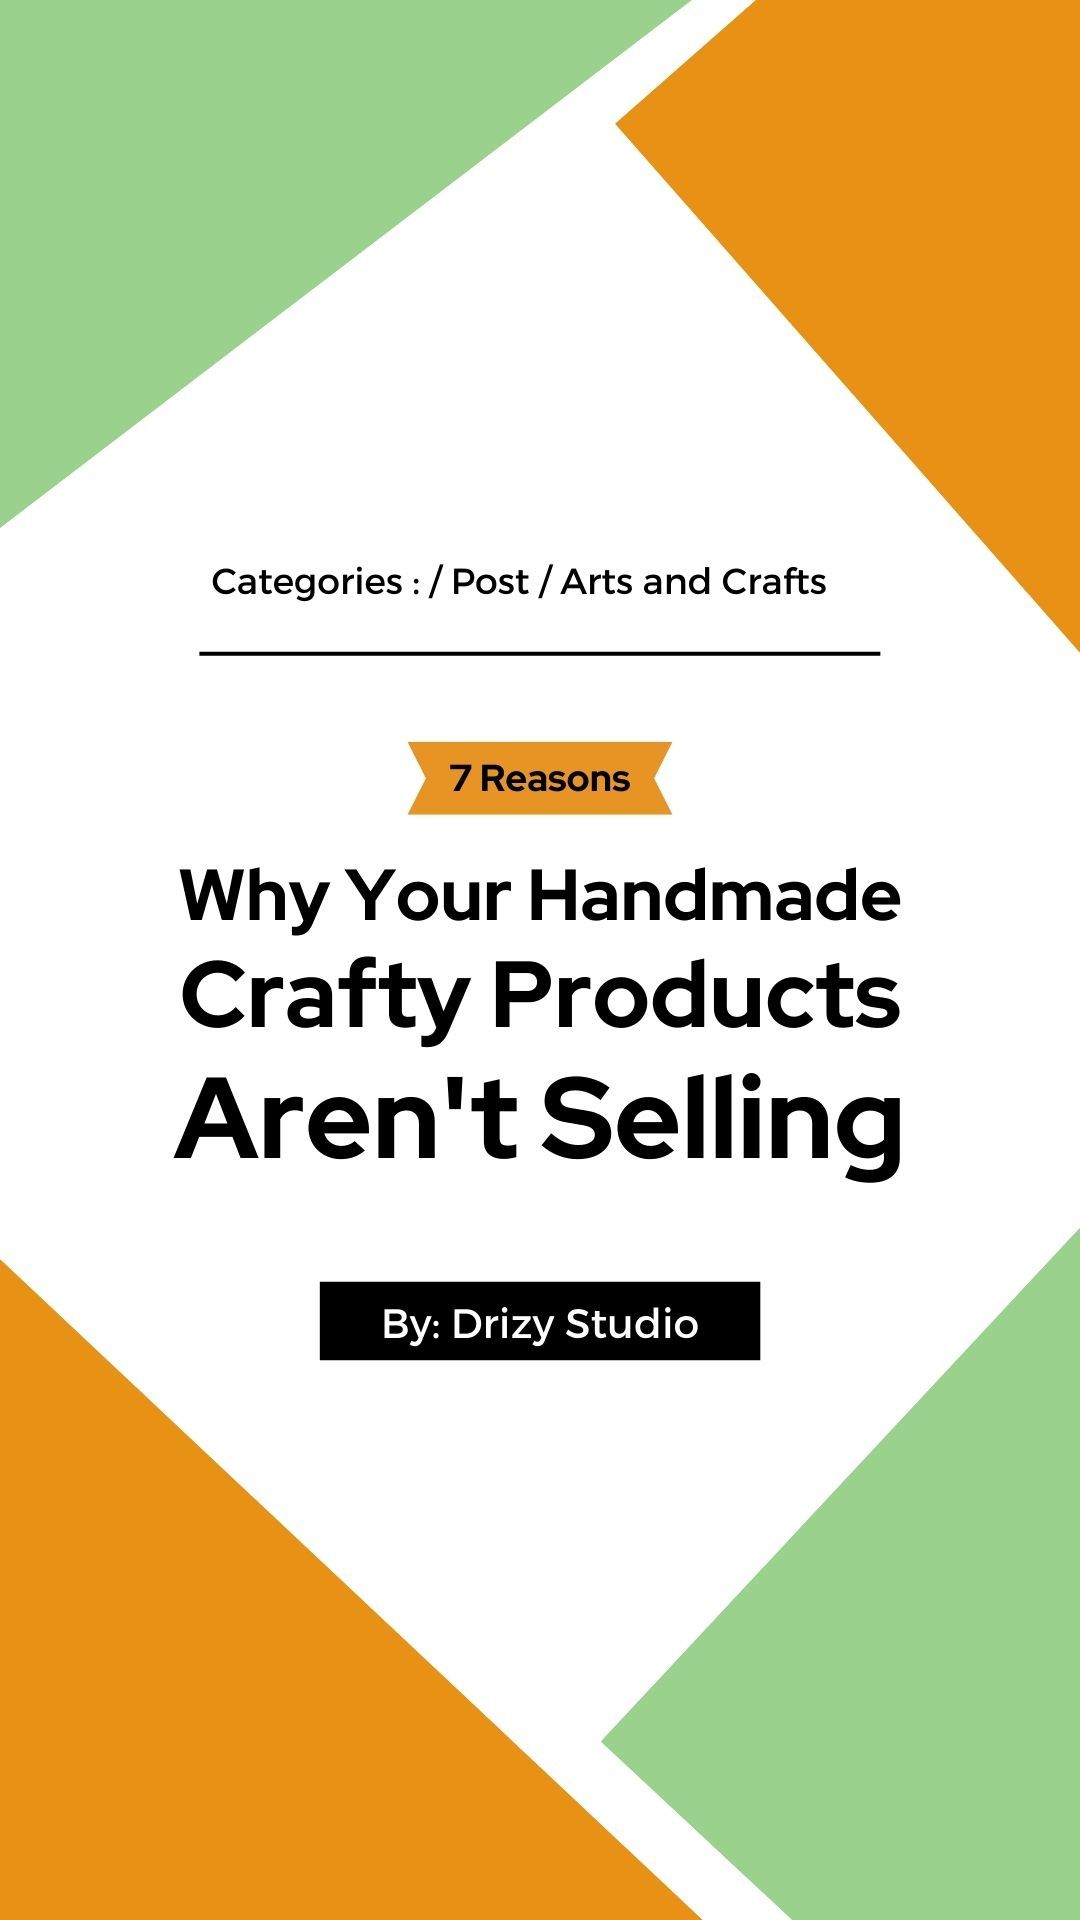 Crafty Products